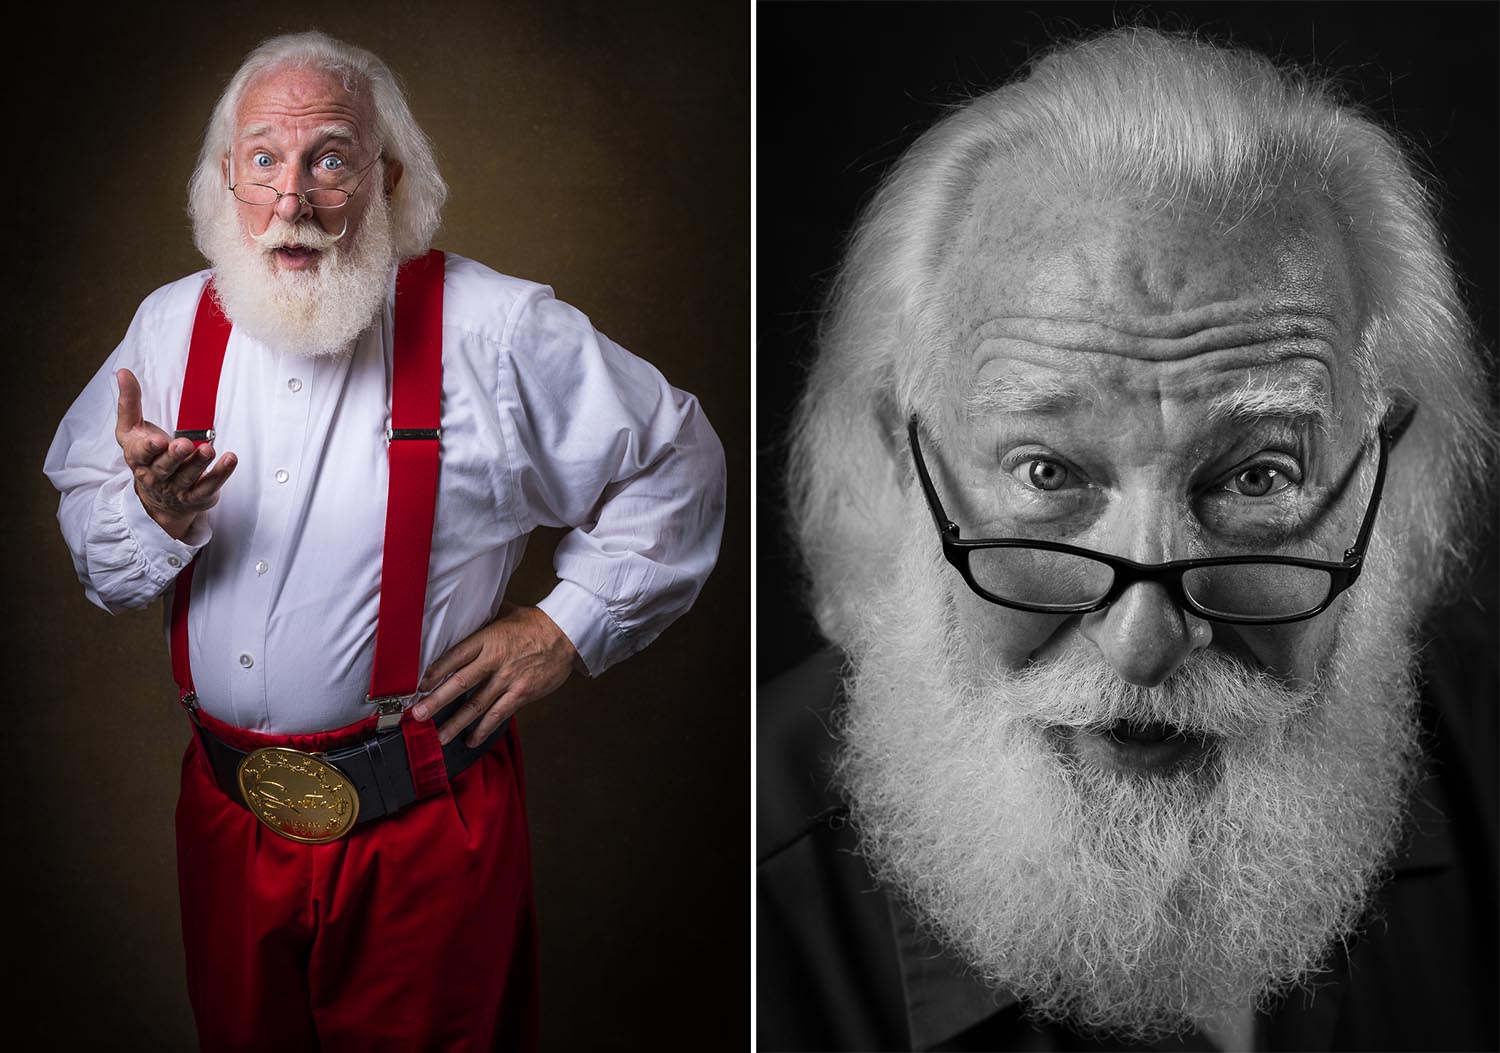 Cooper notes that many of the men portraying Santa are not outwardly religious or even Christian. Rick Rosenthal of Atlanta, Georgia is an Orthodox Jew who has been a professional Santa for many years. His rabbi calls him Santa Rick "Frozenthal."